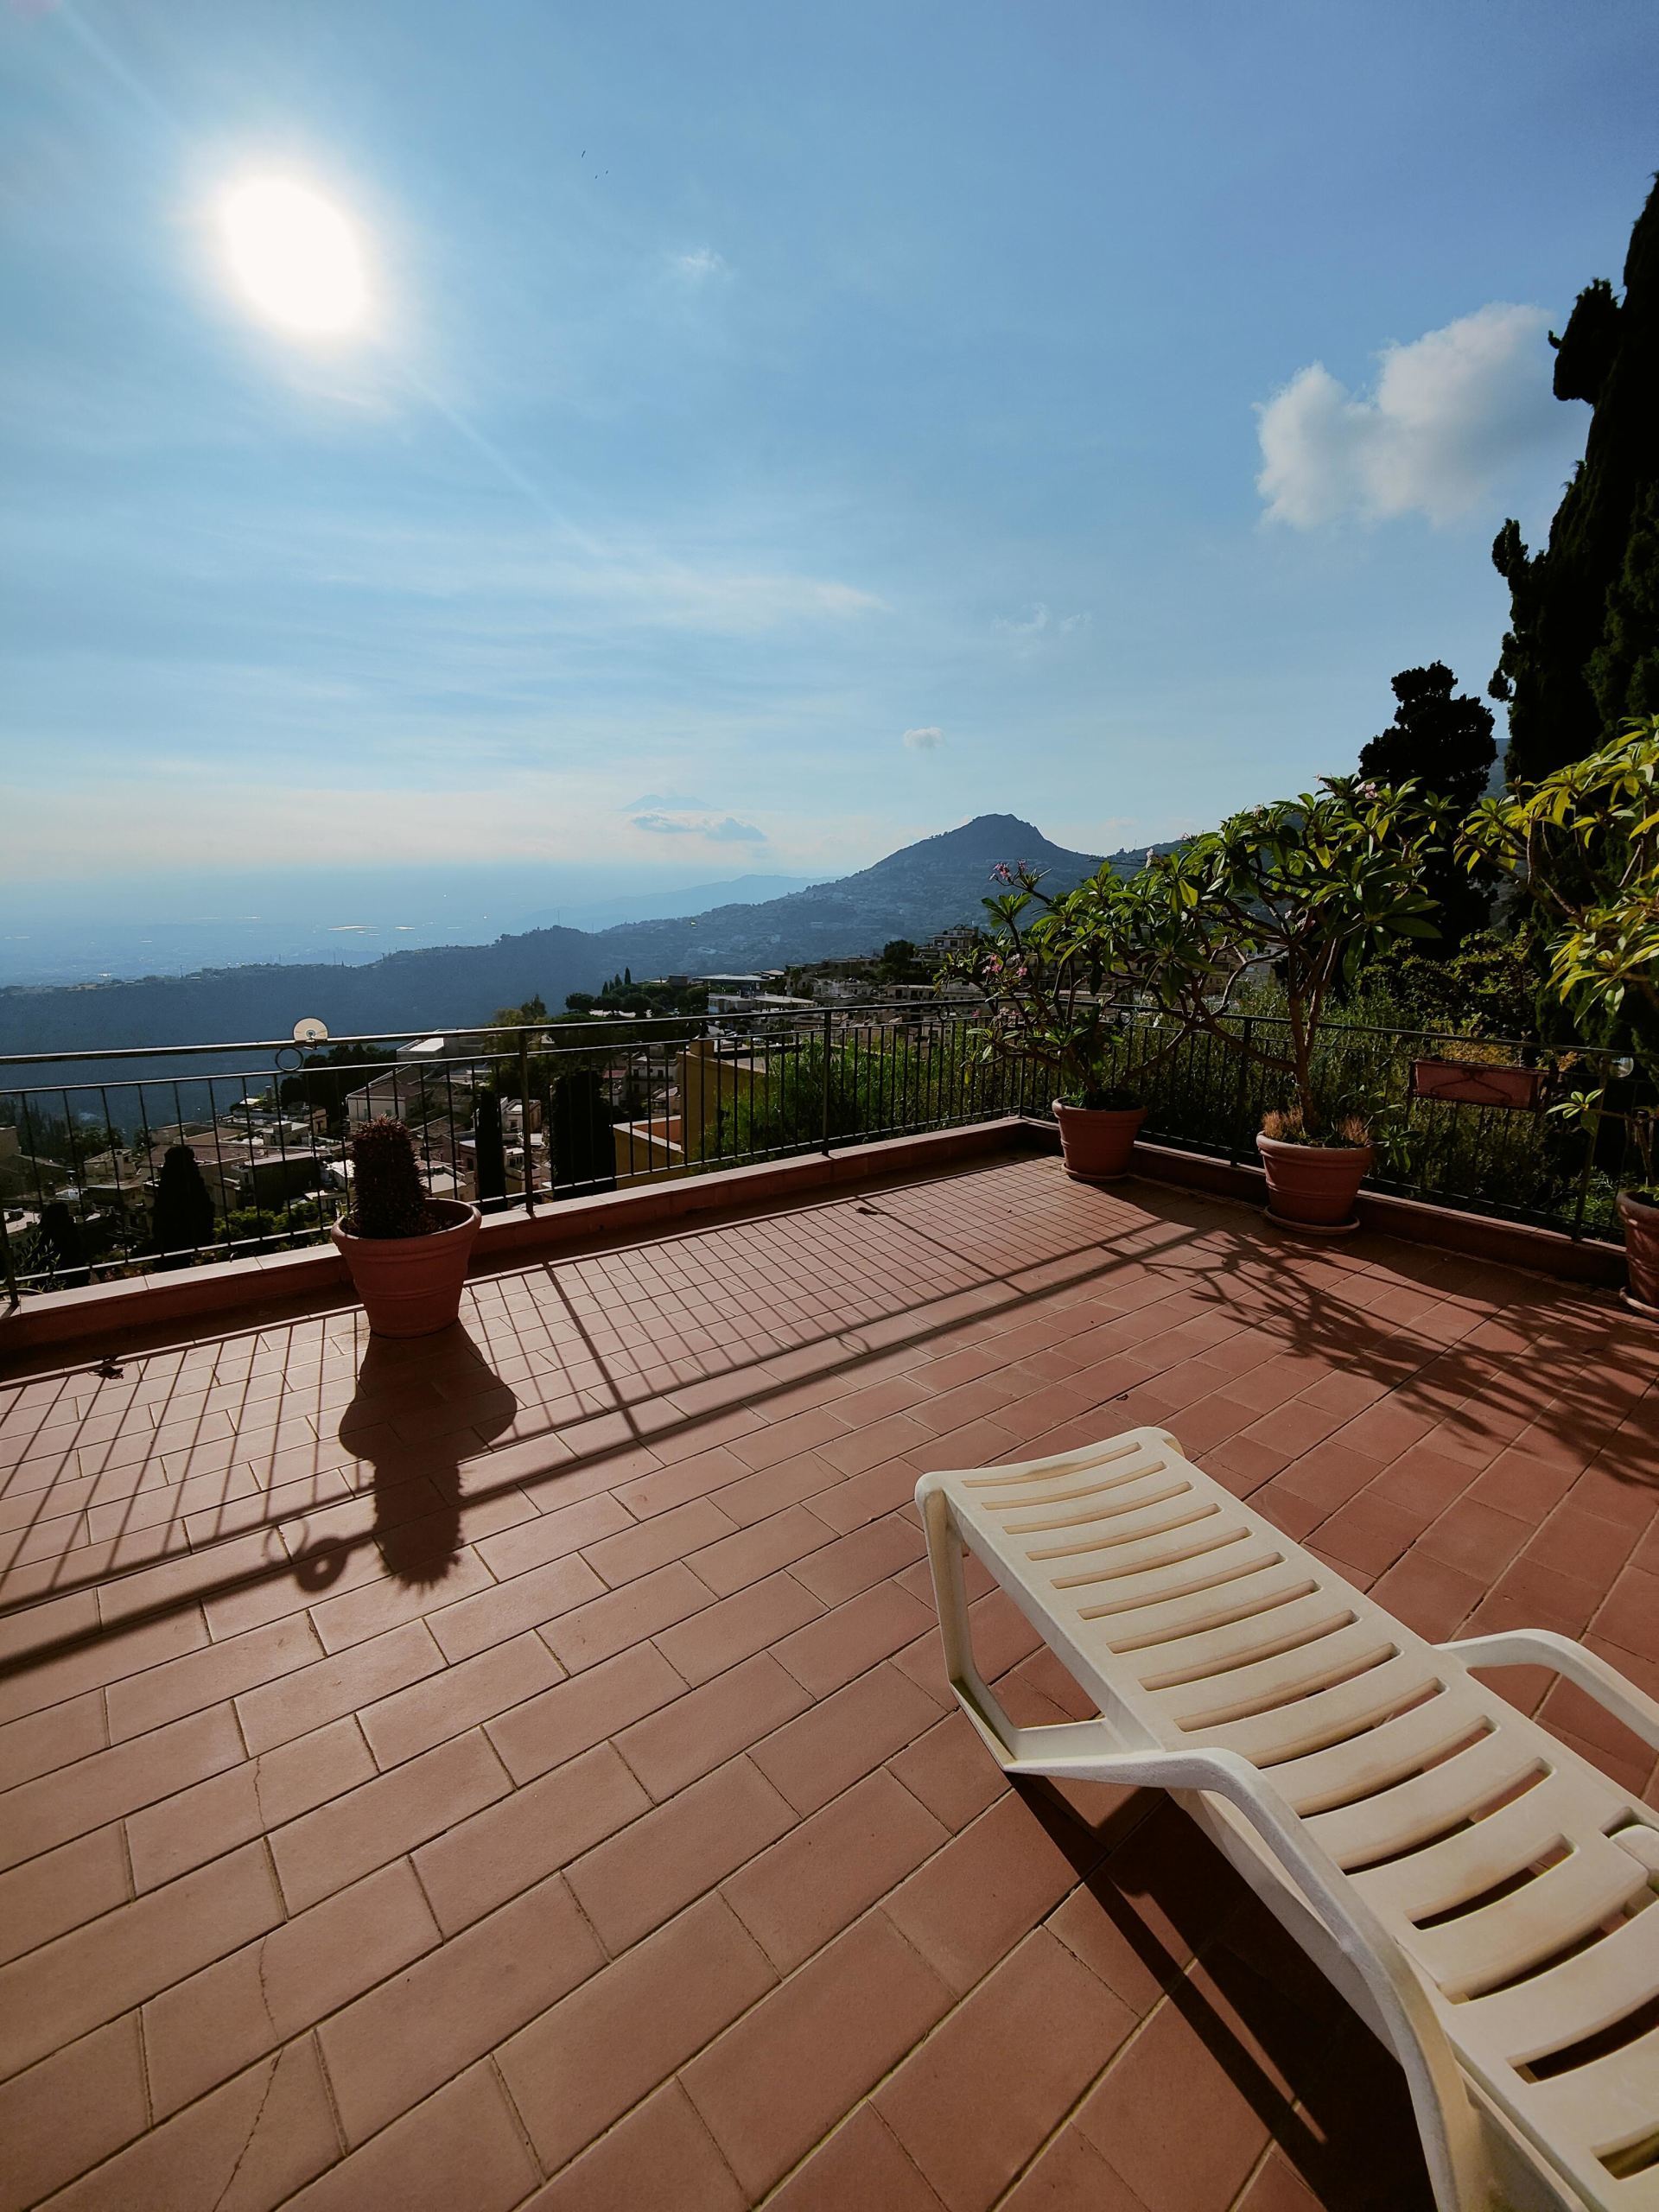 For sale, exclusive villa "the terraces" in taormina with panoramic view.